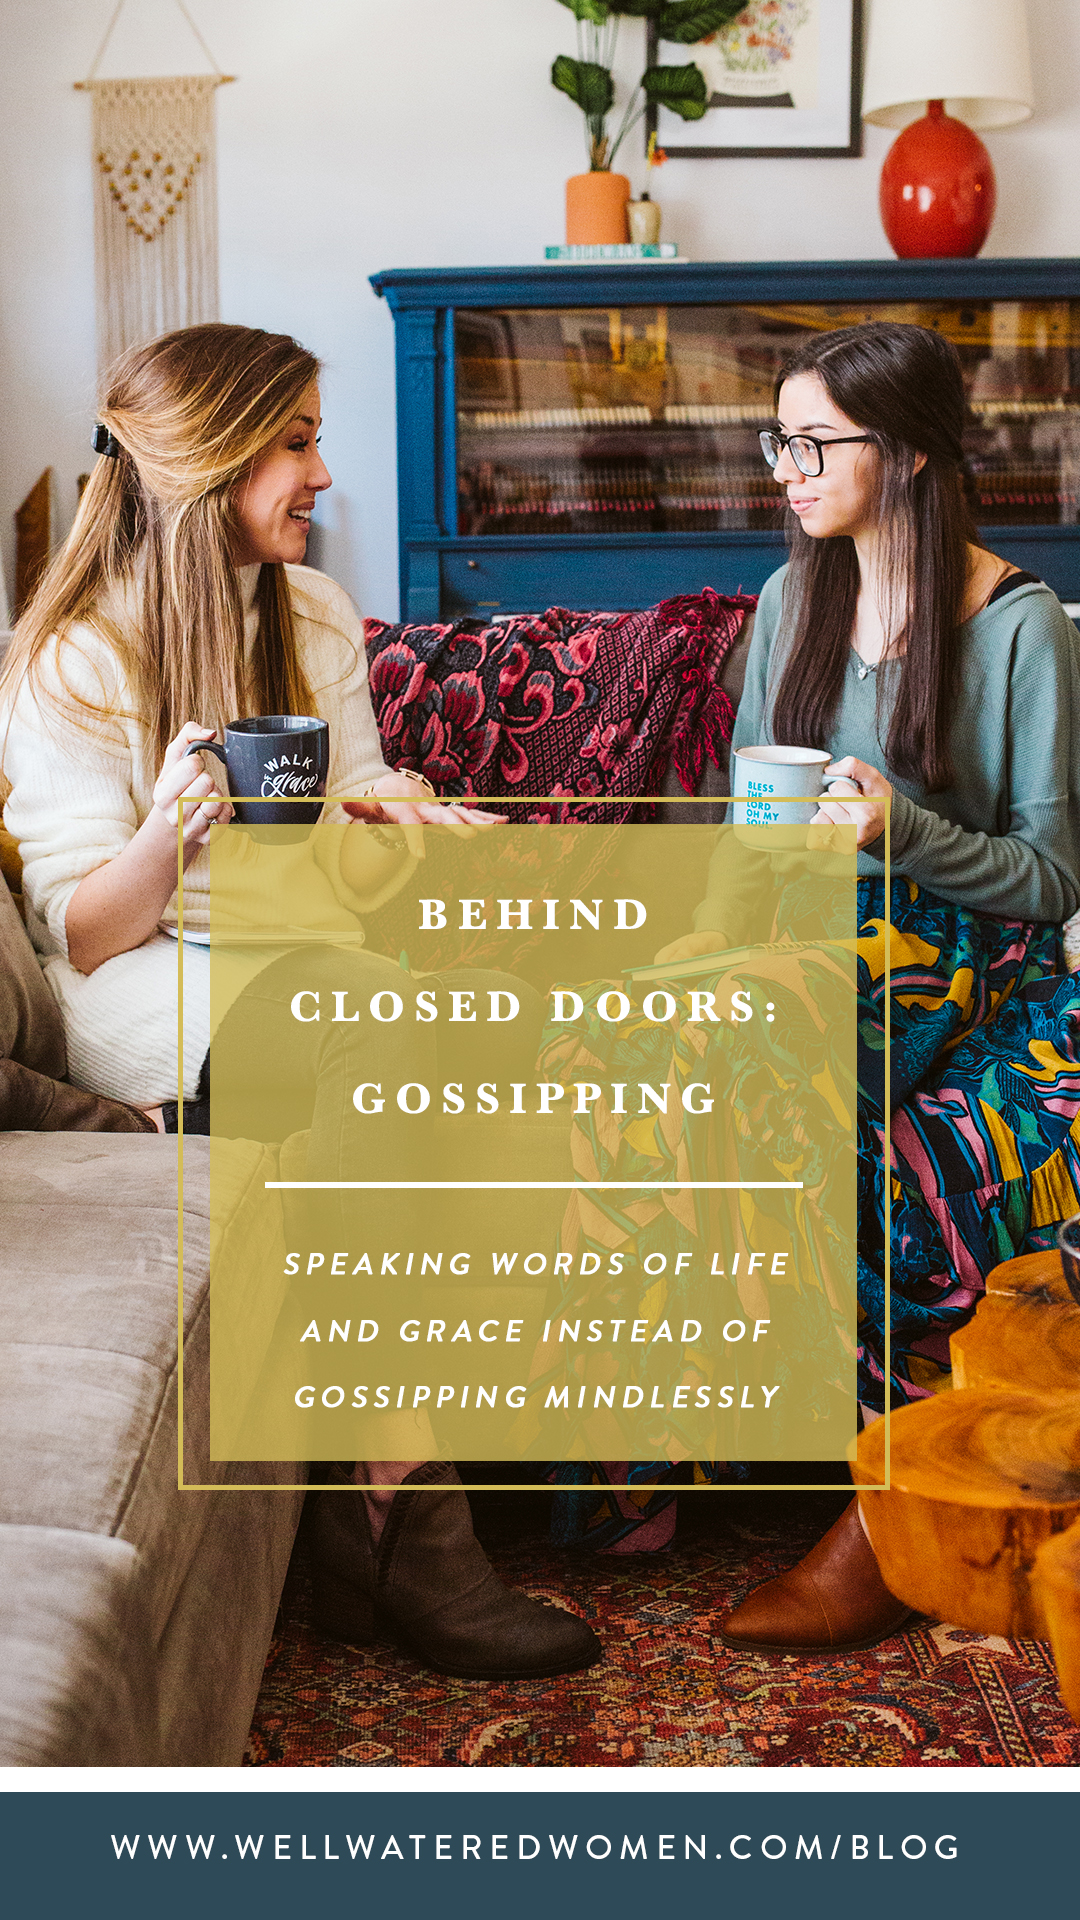 Behind Closed Doors-Gossipping-Well-Watered Women: It’s never too late for the Lord to begin to teach us how to use our tongues for good and not for evil. There is no greater joy than knowing we are being vessels to love others in His great name. So, by His grace, let’s use these mouths He’s given us to point others to our amazing Savior, Jesus.